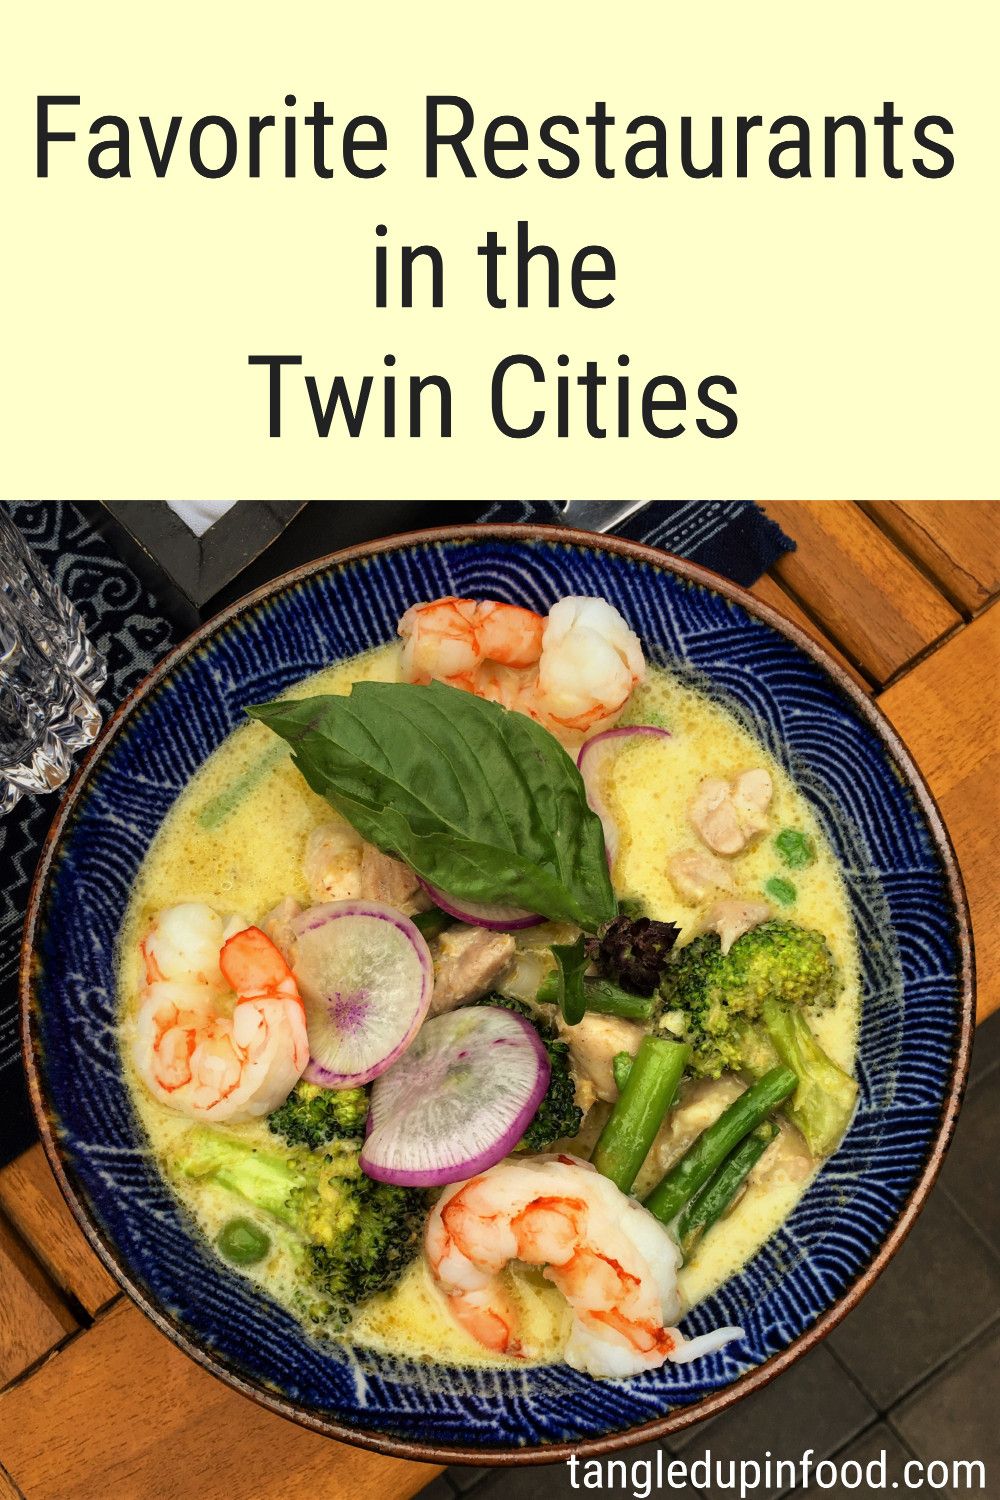 Bowl of soup with text reading "Favorite Restaurants in the Twin Cities"